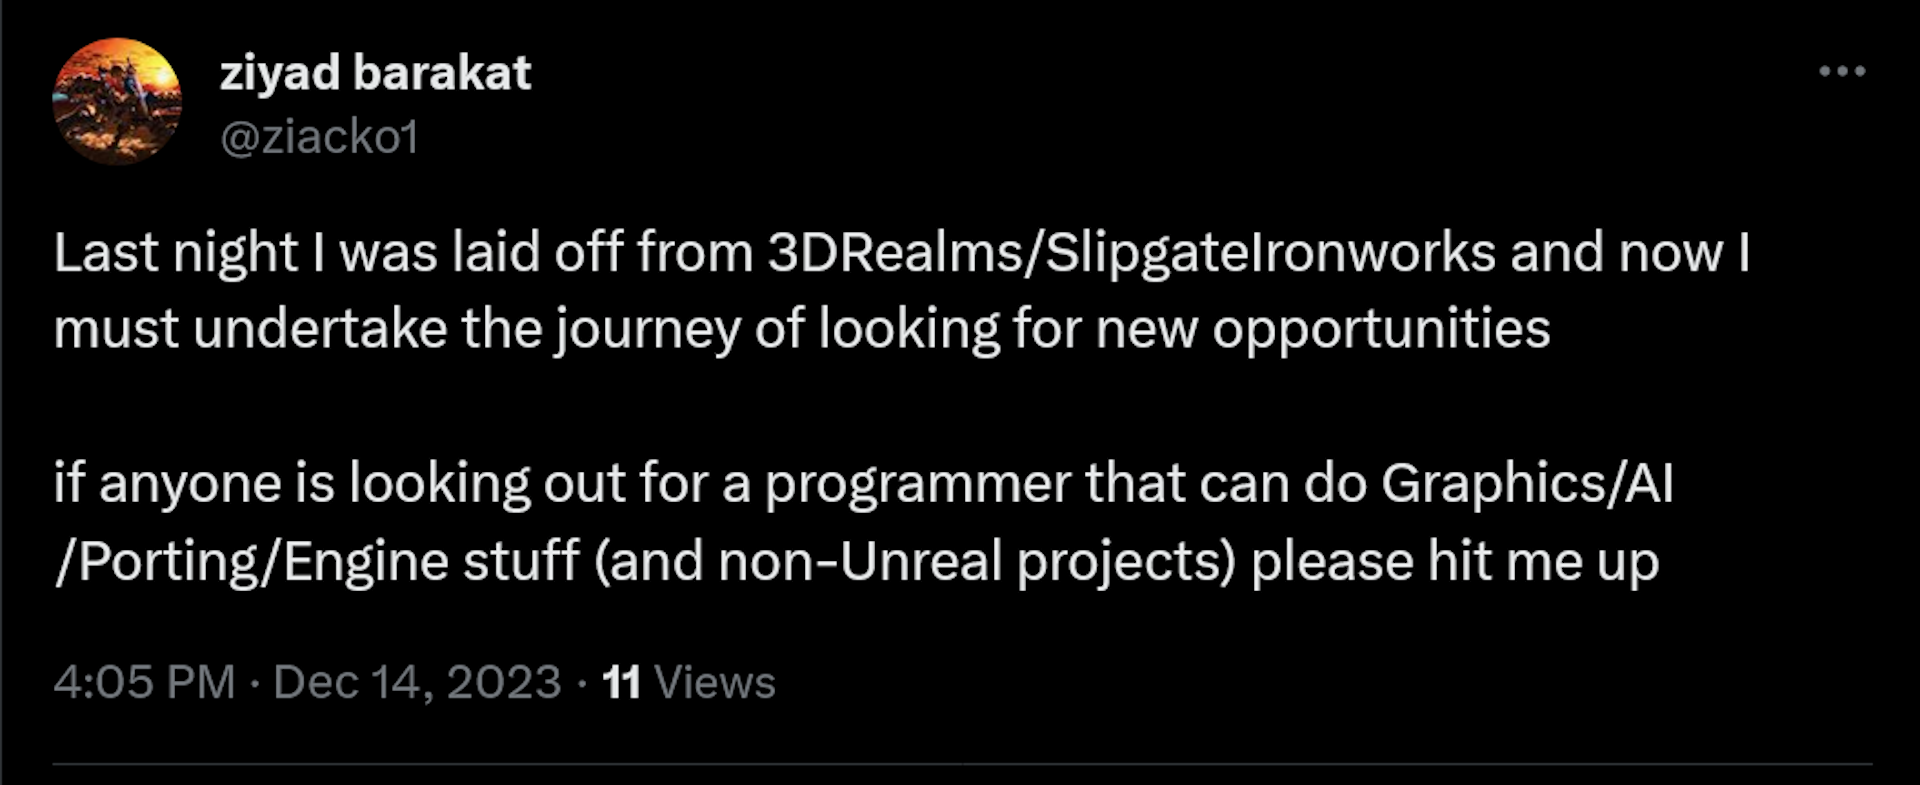 Last night I was laid off from 3DRealms/SlipgateIronworks and now I must undertake the journey of looking for new opportunities  if anyone is looking out for a programmer that can do Graphics/AI/Porting/Engine stuff (and non-Unreal projects) please hit me up